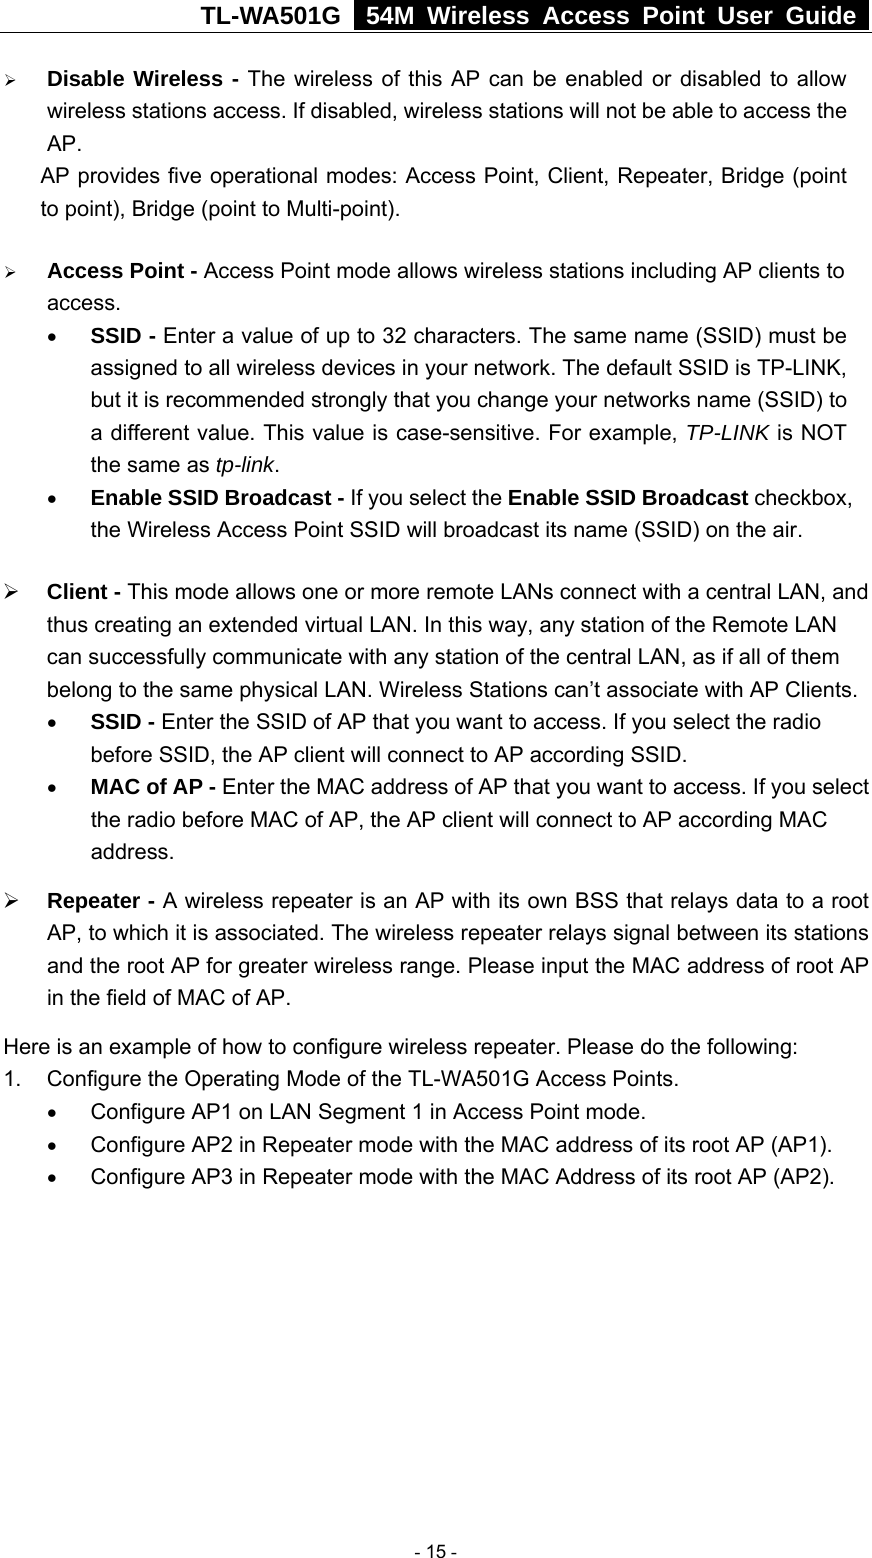 TL-WA501G   54M Wireless Access Point User Guide  ¾ Disable Wireless - The wireless of this AP can be enabled or disabled to allow wireless stations access. If disabled, wireless stations will not be able to access the AP. AP provides five operational modes: Access Point, Client, Repeater, Bridge (point to point), Bridge (point to Multi-point). ¾ Access Point - Access Point mode allows wireless stations including AP clients to access.  • SSID - Enter a value of up to 32 characters. The same name (SSID) must be assigned to all wireless devices in your network. The default SSID is TP-LINK, but it is recommended strongly that you change your networks name (SSID) to a different value. This value is case-sensitive. For example, TP-LINK is NOT the same as tp-link. • Enable SSID Broadcast - If you select the Enable SSID Broadcast checkbox, the Wireless Access Point SSID will broadcast its name (SSID) on the air. ¾ Client - This mode allows one or more remote LANs connect with a central LAN, and thus creating an extended virtual LAN. In this way, any station of the Remote LAN can successfully communicate with any station of the central LAN, as if all of them belong to the same physical LAN. Wireless Stations can’t associate with AP Clients. • SSID - Enter the SSID of AP that you want to access. If you select the radio before SSID, the AP client will connect to AP according SSID.   • MAC of AP - Enter the MAC address of AP that you want to access. If you select the radio before MAC of AP, the AP client will connect to AP according MAC address.  ¾ Repeater - A wireless repeater is an AP with its own BSS that relays data to a root AP, to which it is associated. The wireless repeater relays signal between its stations and the root AP for greater wireless range. Please input the MAC address of root AP in the field of MAC of AP.   Here is an example of how to configure wireless repeater. Please do the following: 1.  Configure the Operating Mode of the TL-WA501G Access Points.   • Configure AP1 on LAN Segment 1 in Access Point mode. • Configure AP2 in Repeater mode with the MAC address of its root AP (AP1). • Configure AP3 in Repeater mode with the MAC Address of its root AP (AP2).    - 15 - 